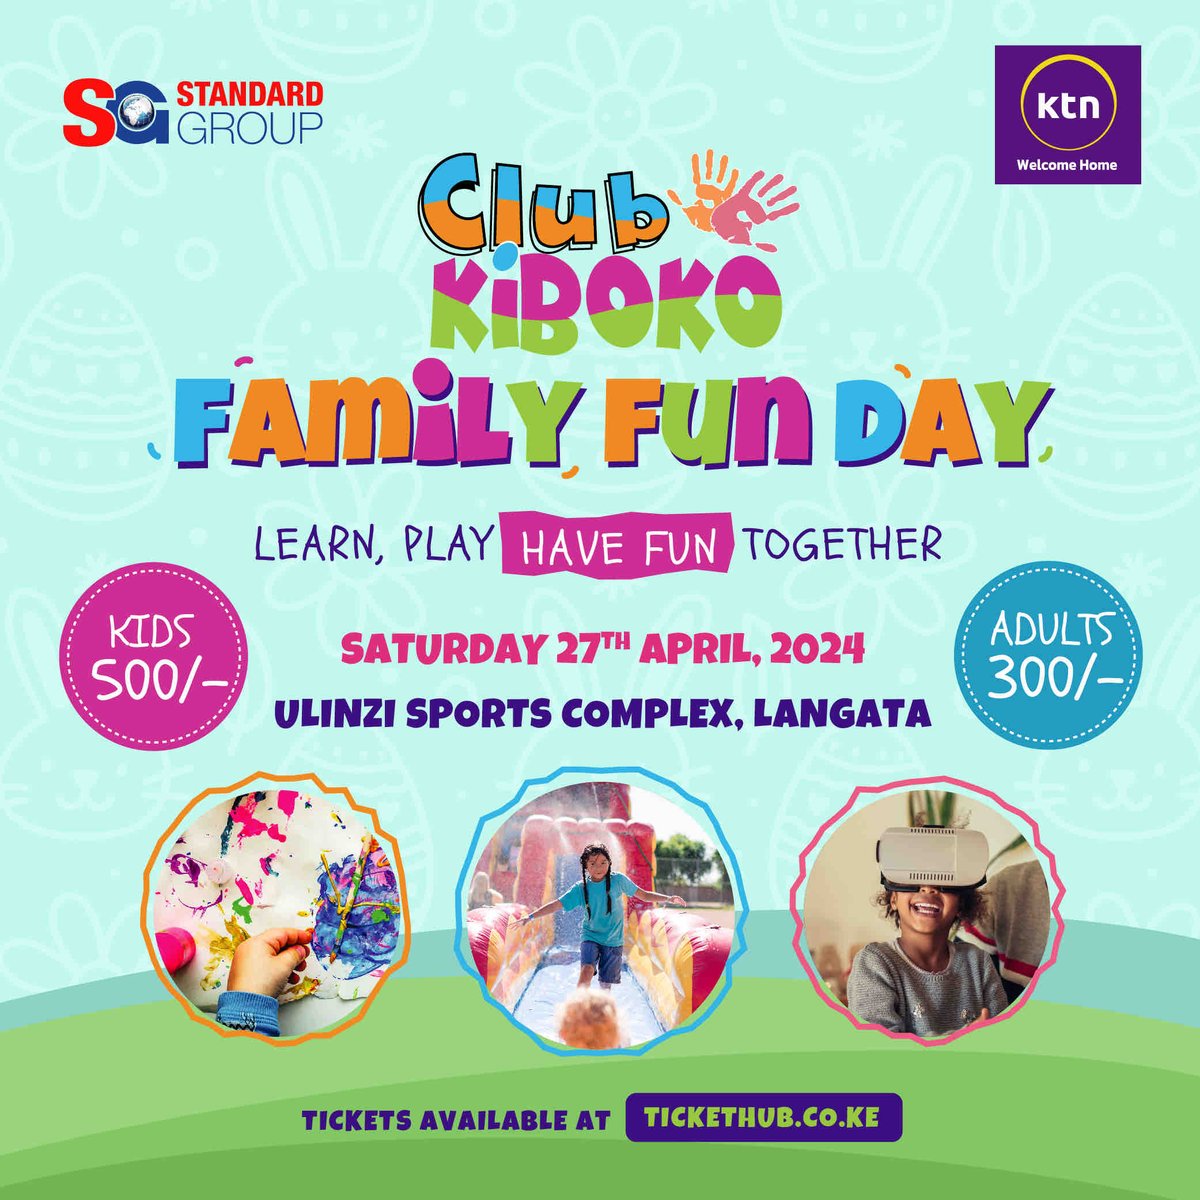 Experience the thrill of Club Kiboko Family Fun Day on April 27th! 🥳✨ With a variety of activities suitable for all ages, it’s the ultimate family outing. 👨‍👩‍👧‍👦❤️⚡️ Grab your tickets from the link below. tickethub.co.ke/event/music-an… #ClubKibokoFamilyFunDay